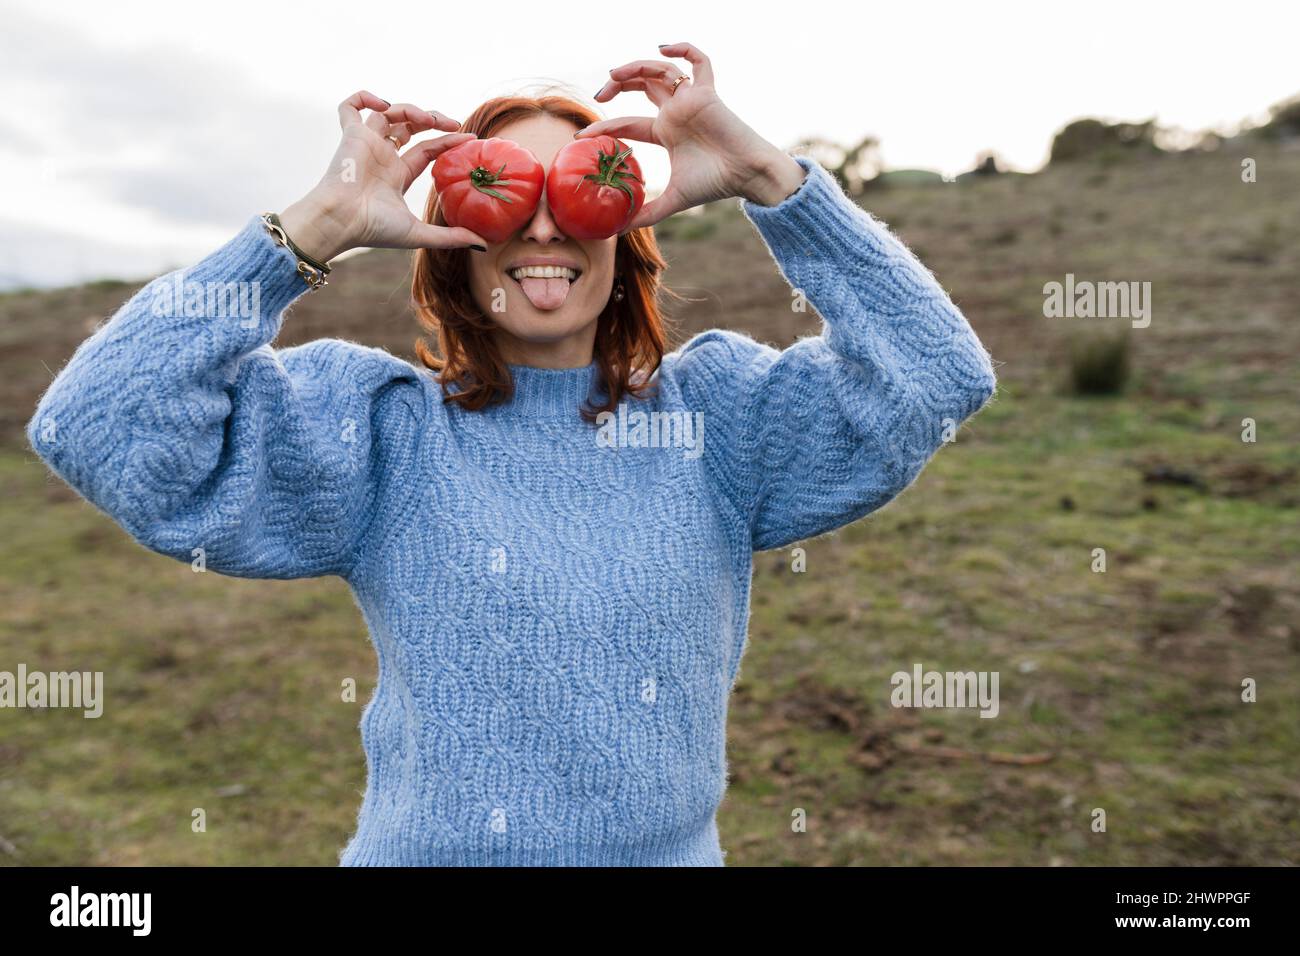 Woman sticking out tongue and covering eyes with red bell pepper Stock Photo